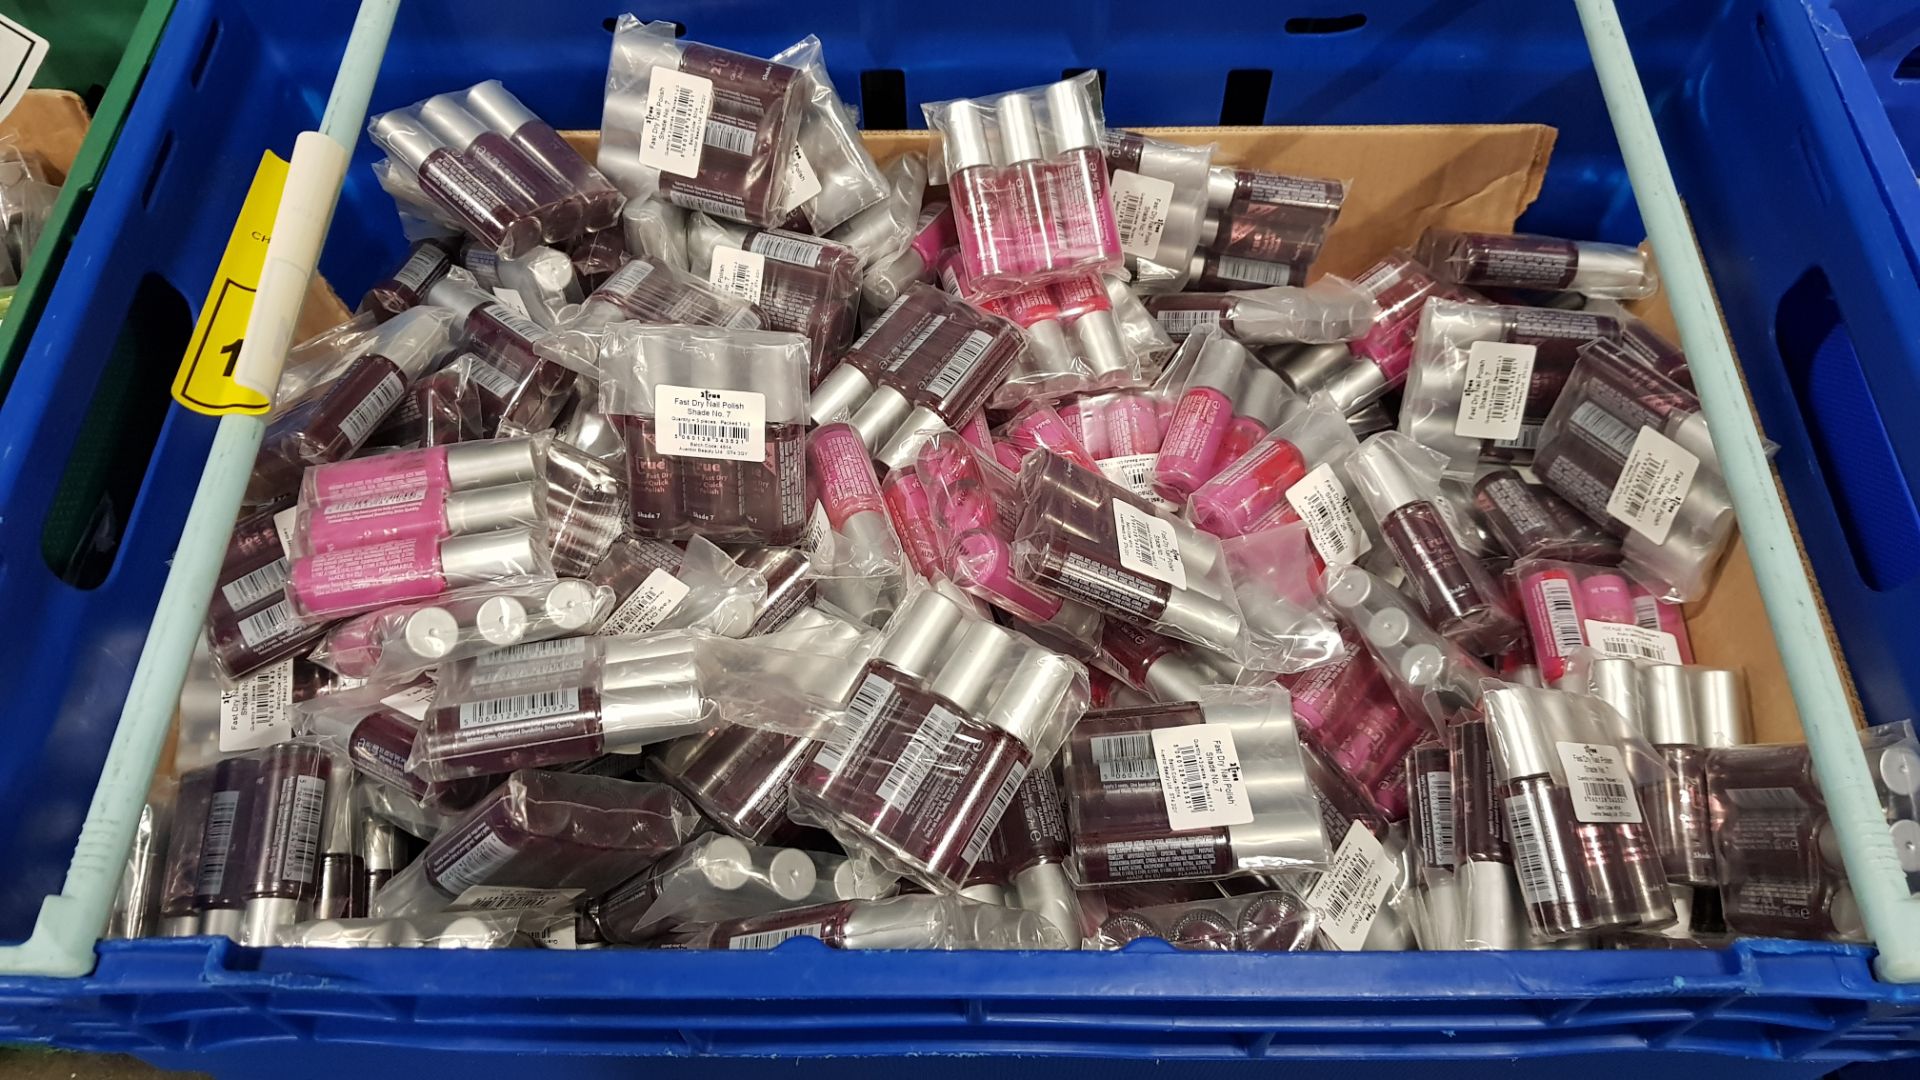 APPROX 500 PIECE BRAND NEW ASSORTED TRAY OF BRANDED NAIL POLISH IN VARIOUS COLOURS. - APPROX TRRP £